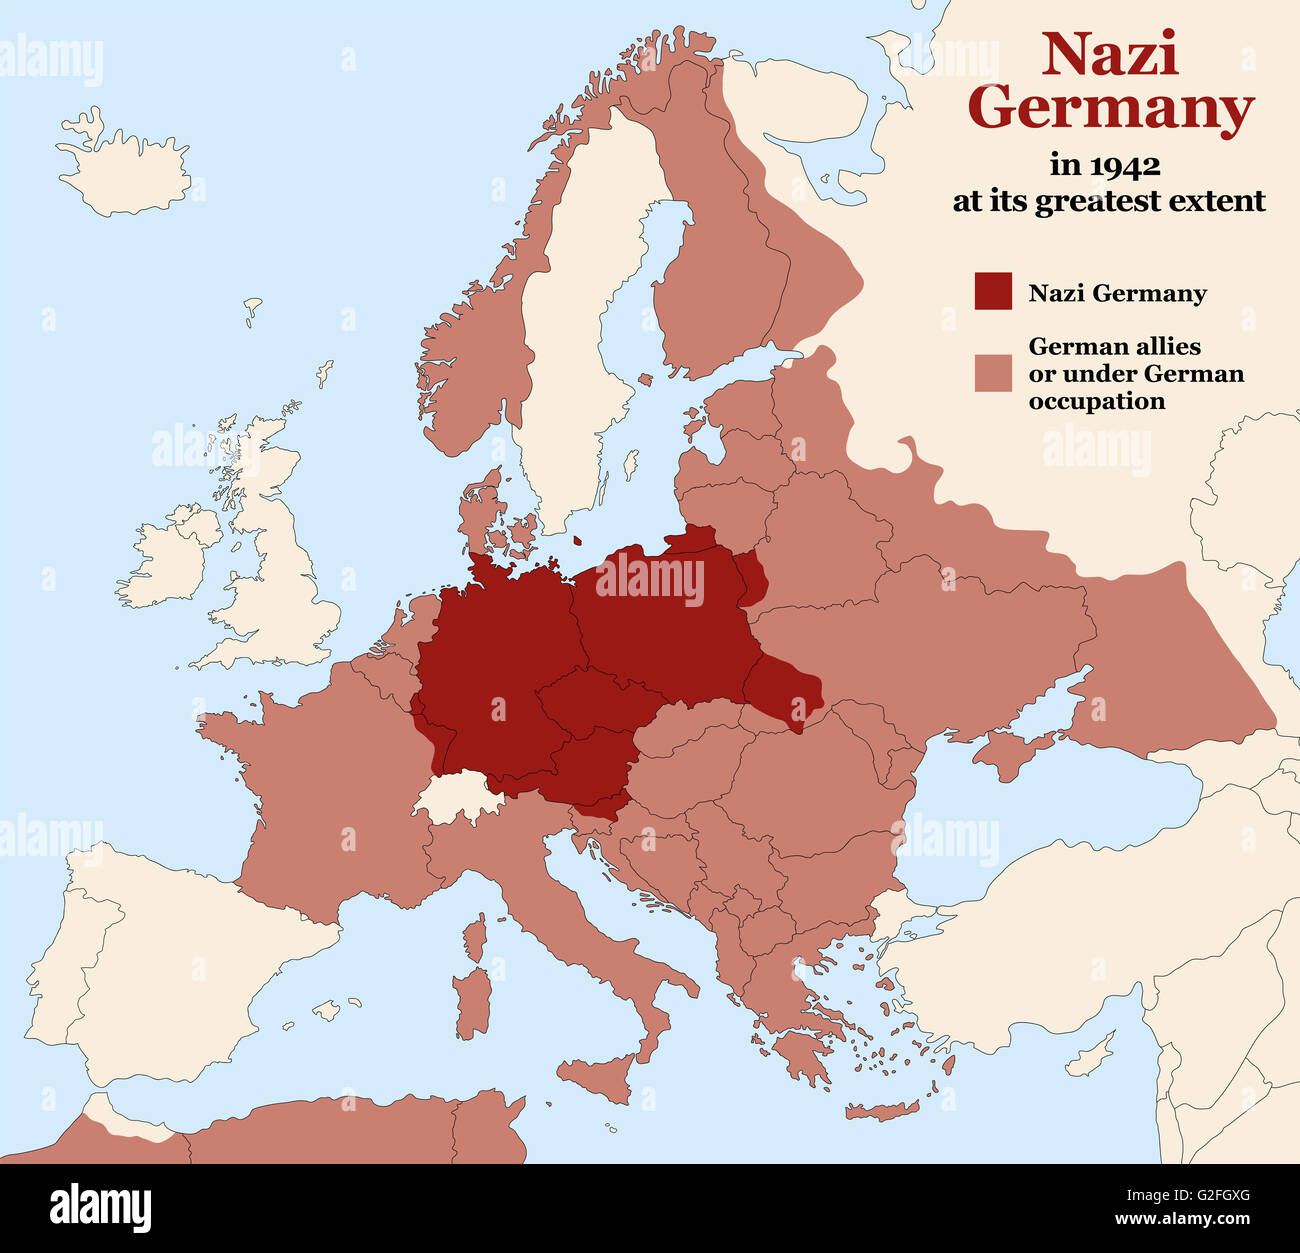 Nazi Germany - Third Reich at its greatest extent in 1942. Map of Europe in Second World War with todays state borders. Stock Photo